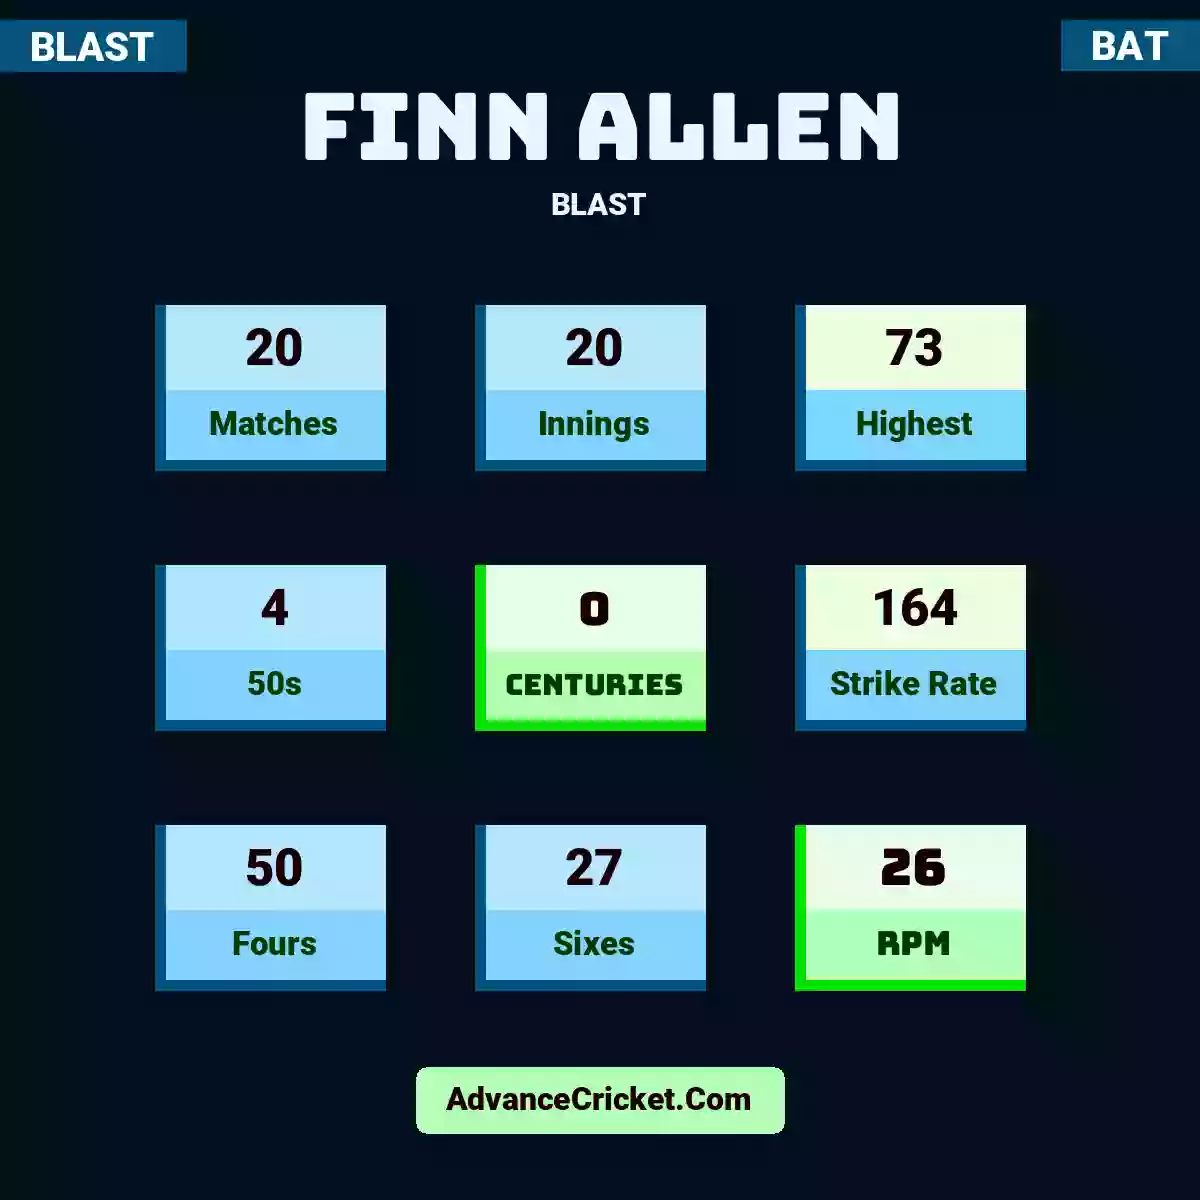 Finn Allen BLAST , Finn Allen played 20 matches, scored 73 runs as highest, 4 half-centuries, and 0 centuries, with a strike rate of 164. F.Allen hit 50 fours and 27 sixes, with an RPM of 26.